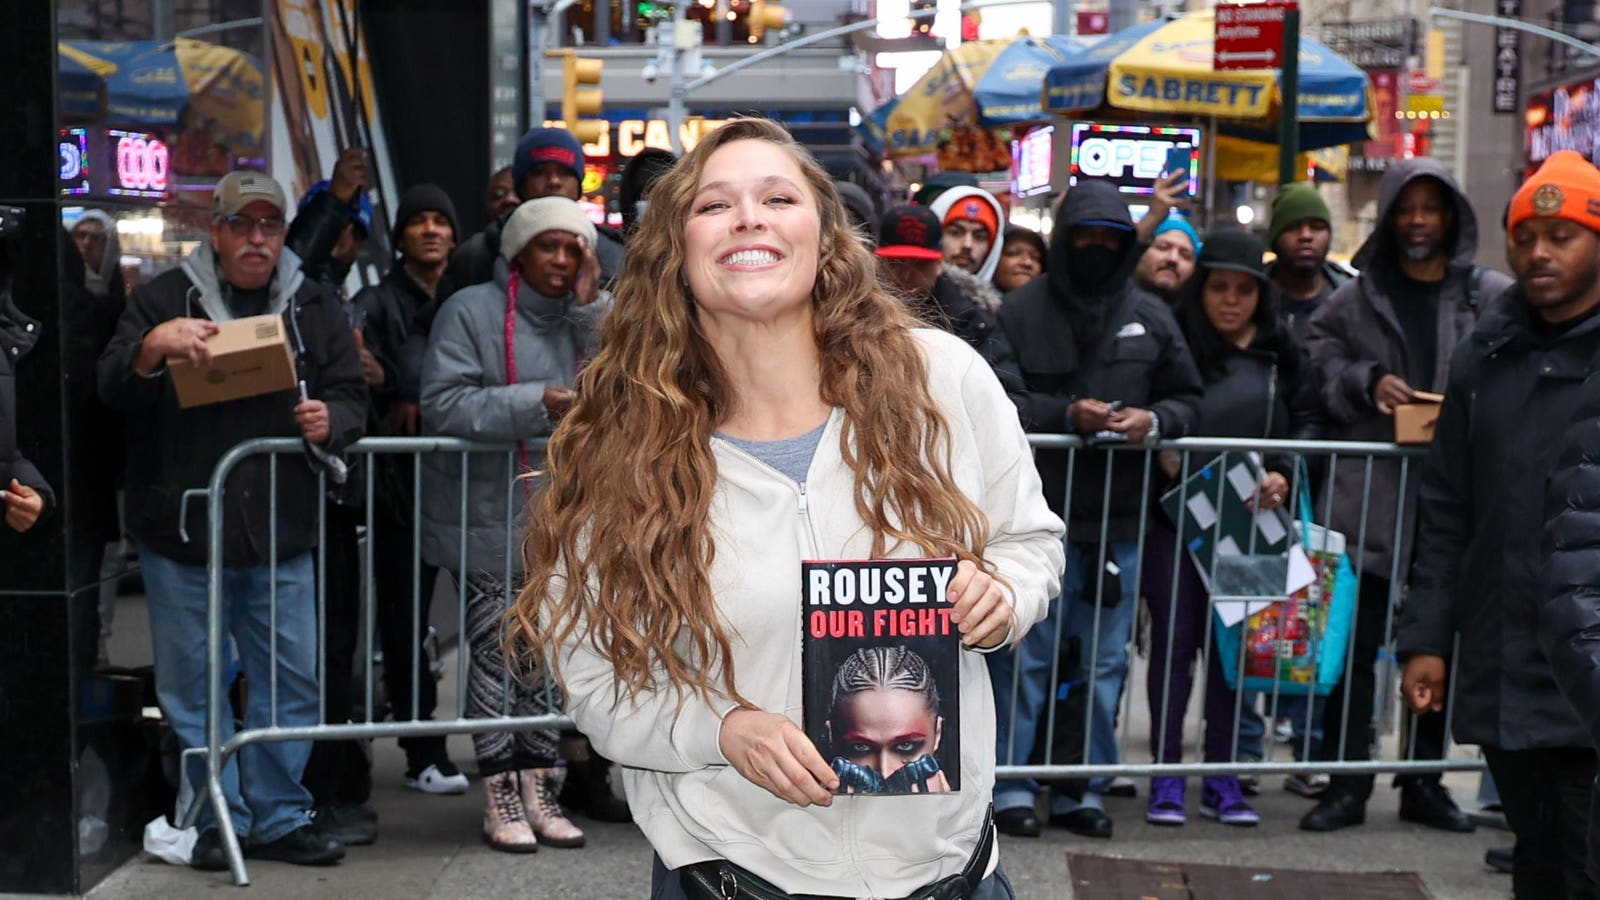 Ronda Rousey Interview Sparks Strong Reaction From MMA Community